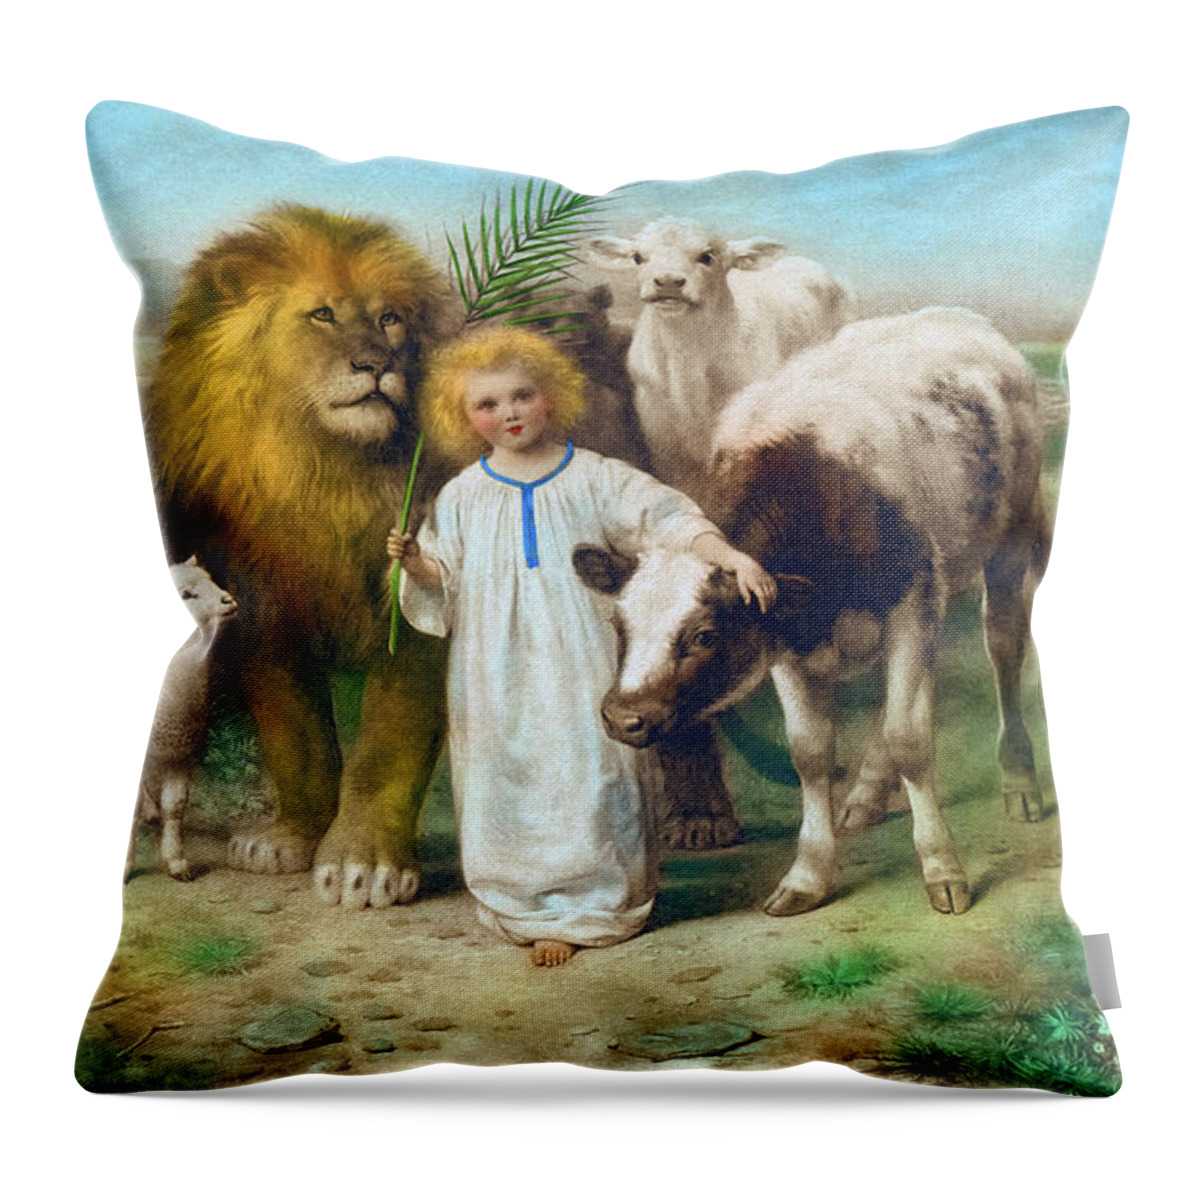 William Strutt Throw Pillow featuring the painting The Peace, 1896 by William Strutt